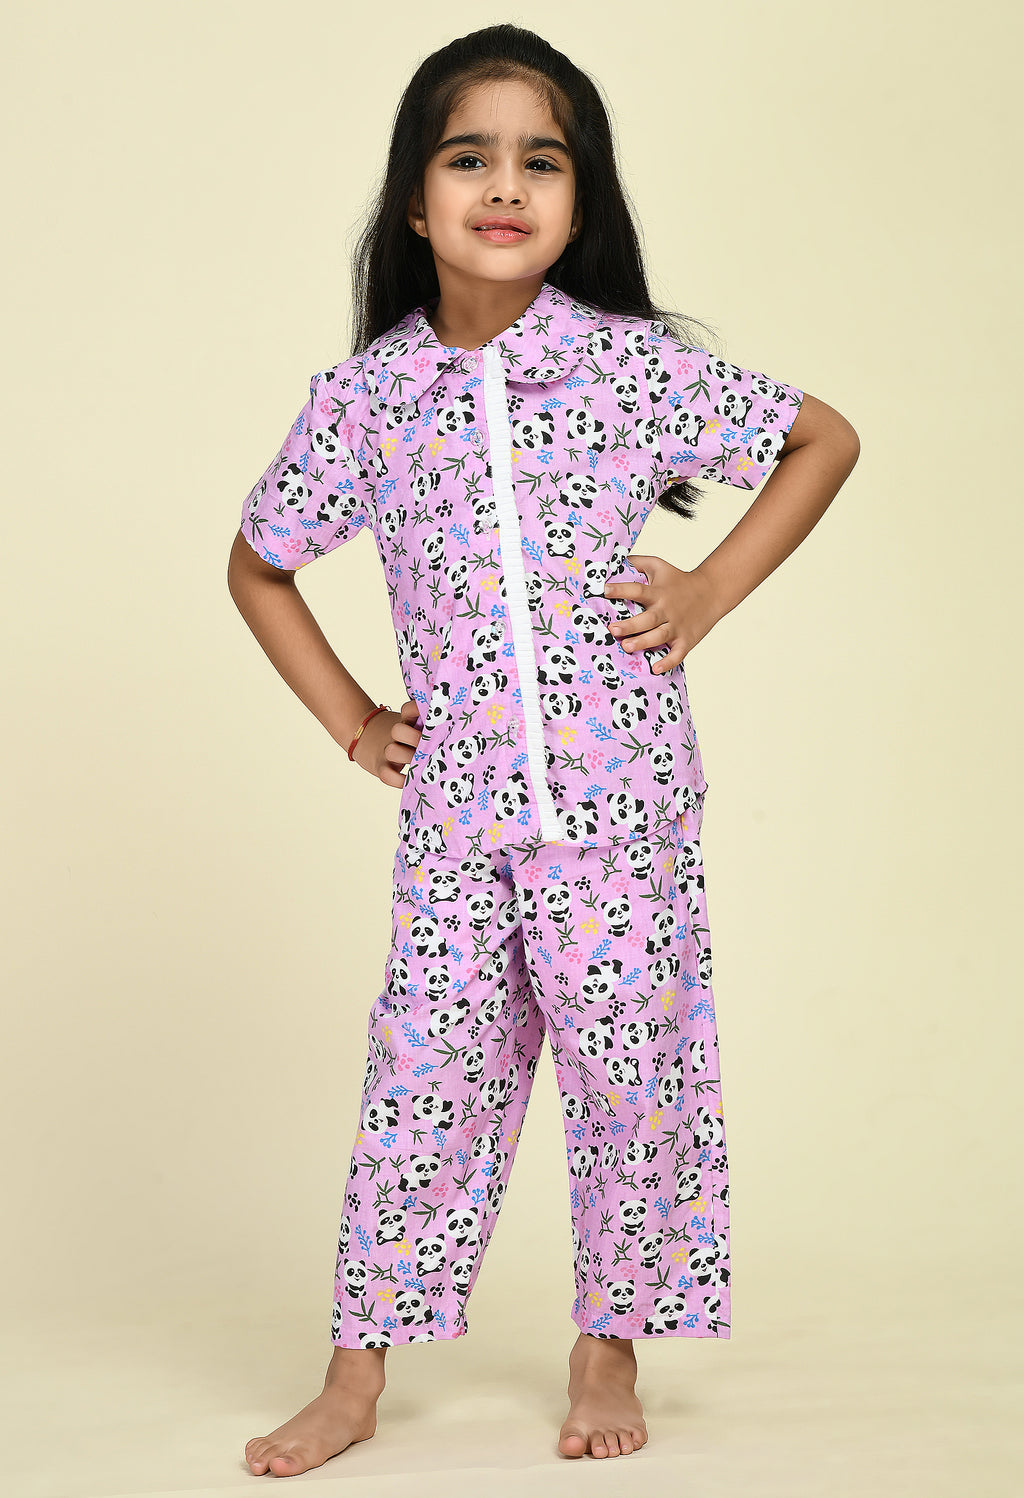 Buy Chheent Cotton Night Suit For Boys & Girls | Pajama Sets For Girls/Boys  | Kids Dress | Kids Pajama Sets | Kids Night Dress | Sleepwear Suit | Top  Pajama |